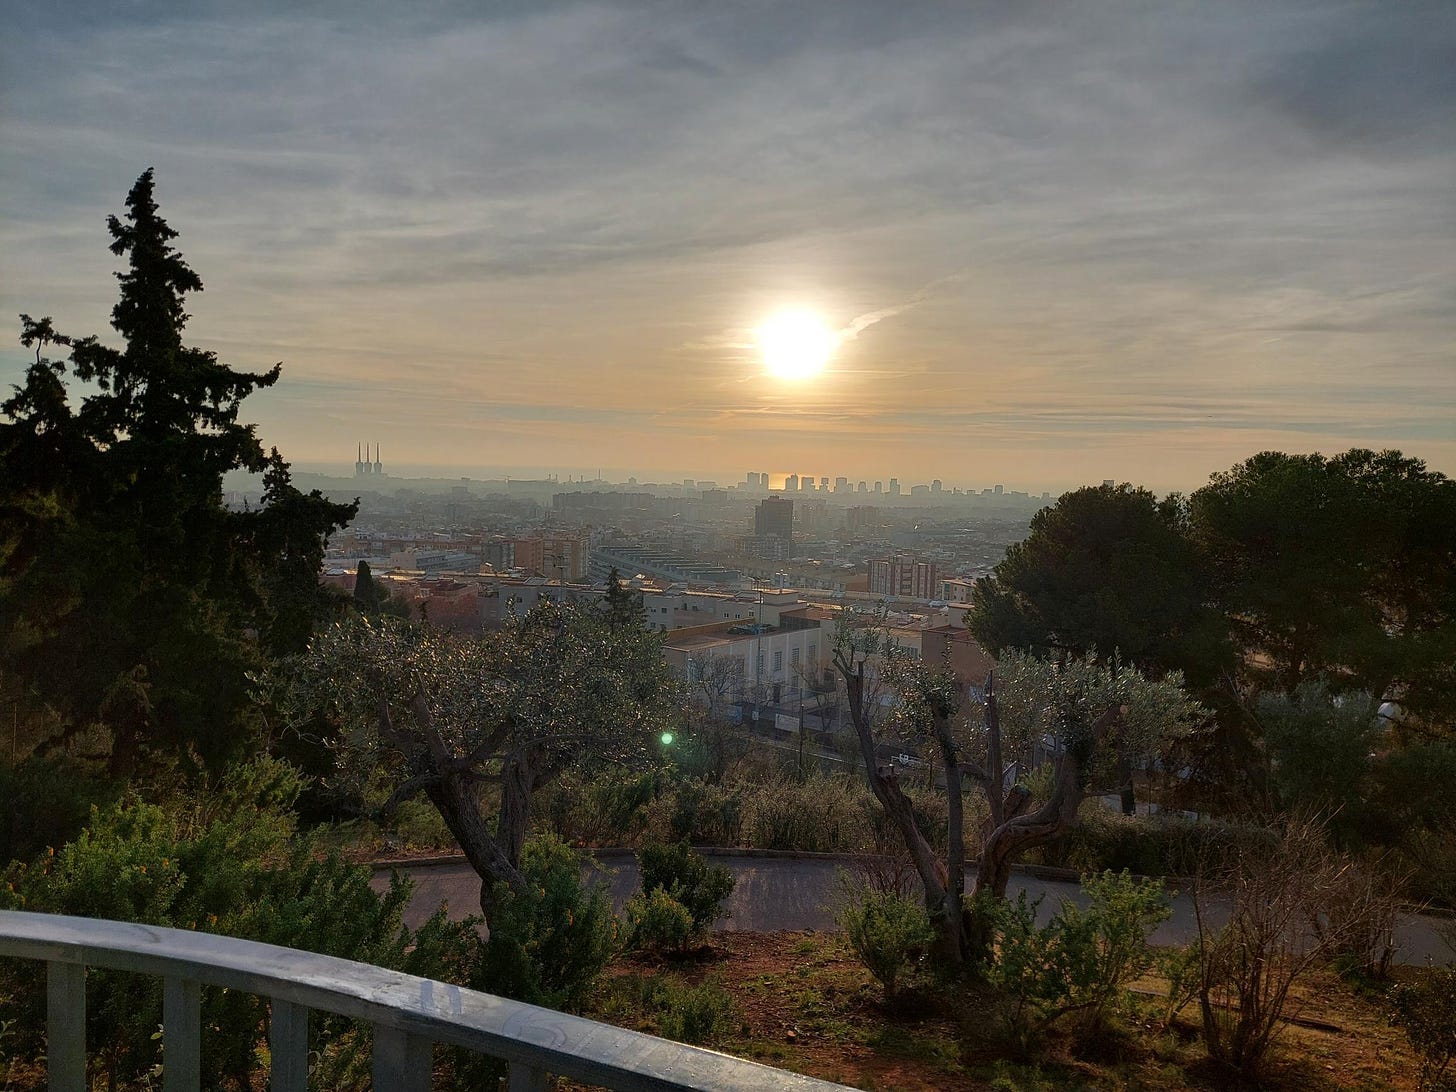 Barcelona looking lovely one January morning, as seen from a hill top in Horta.